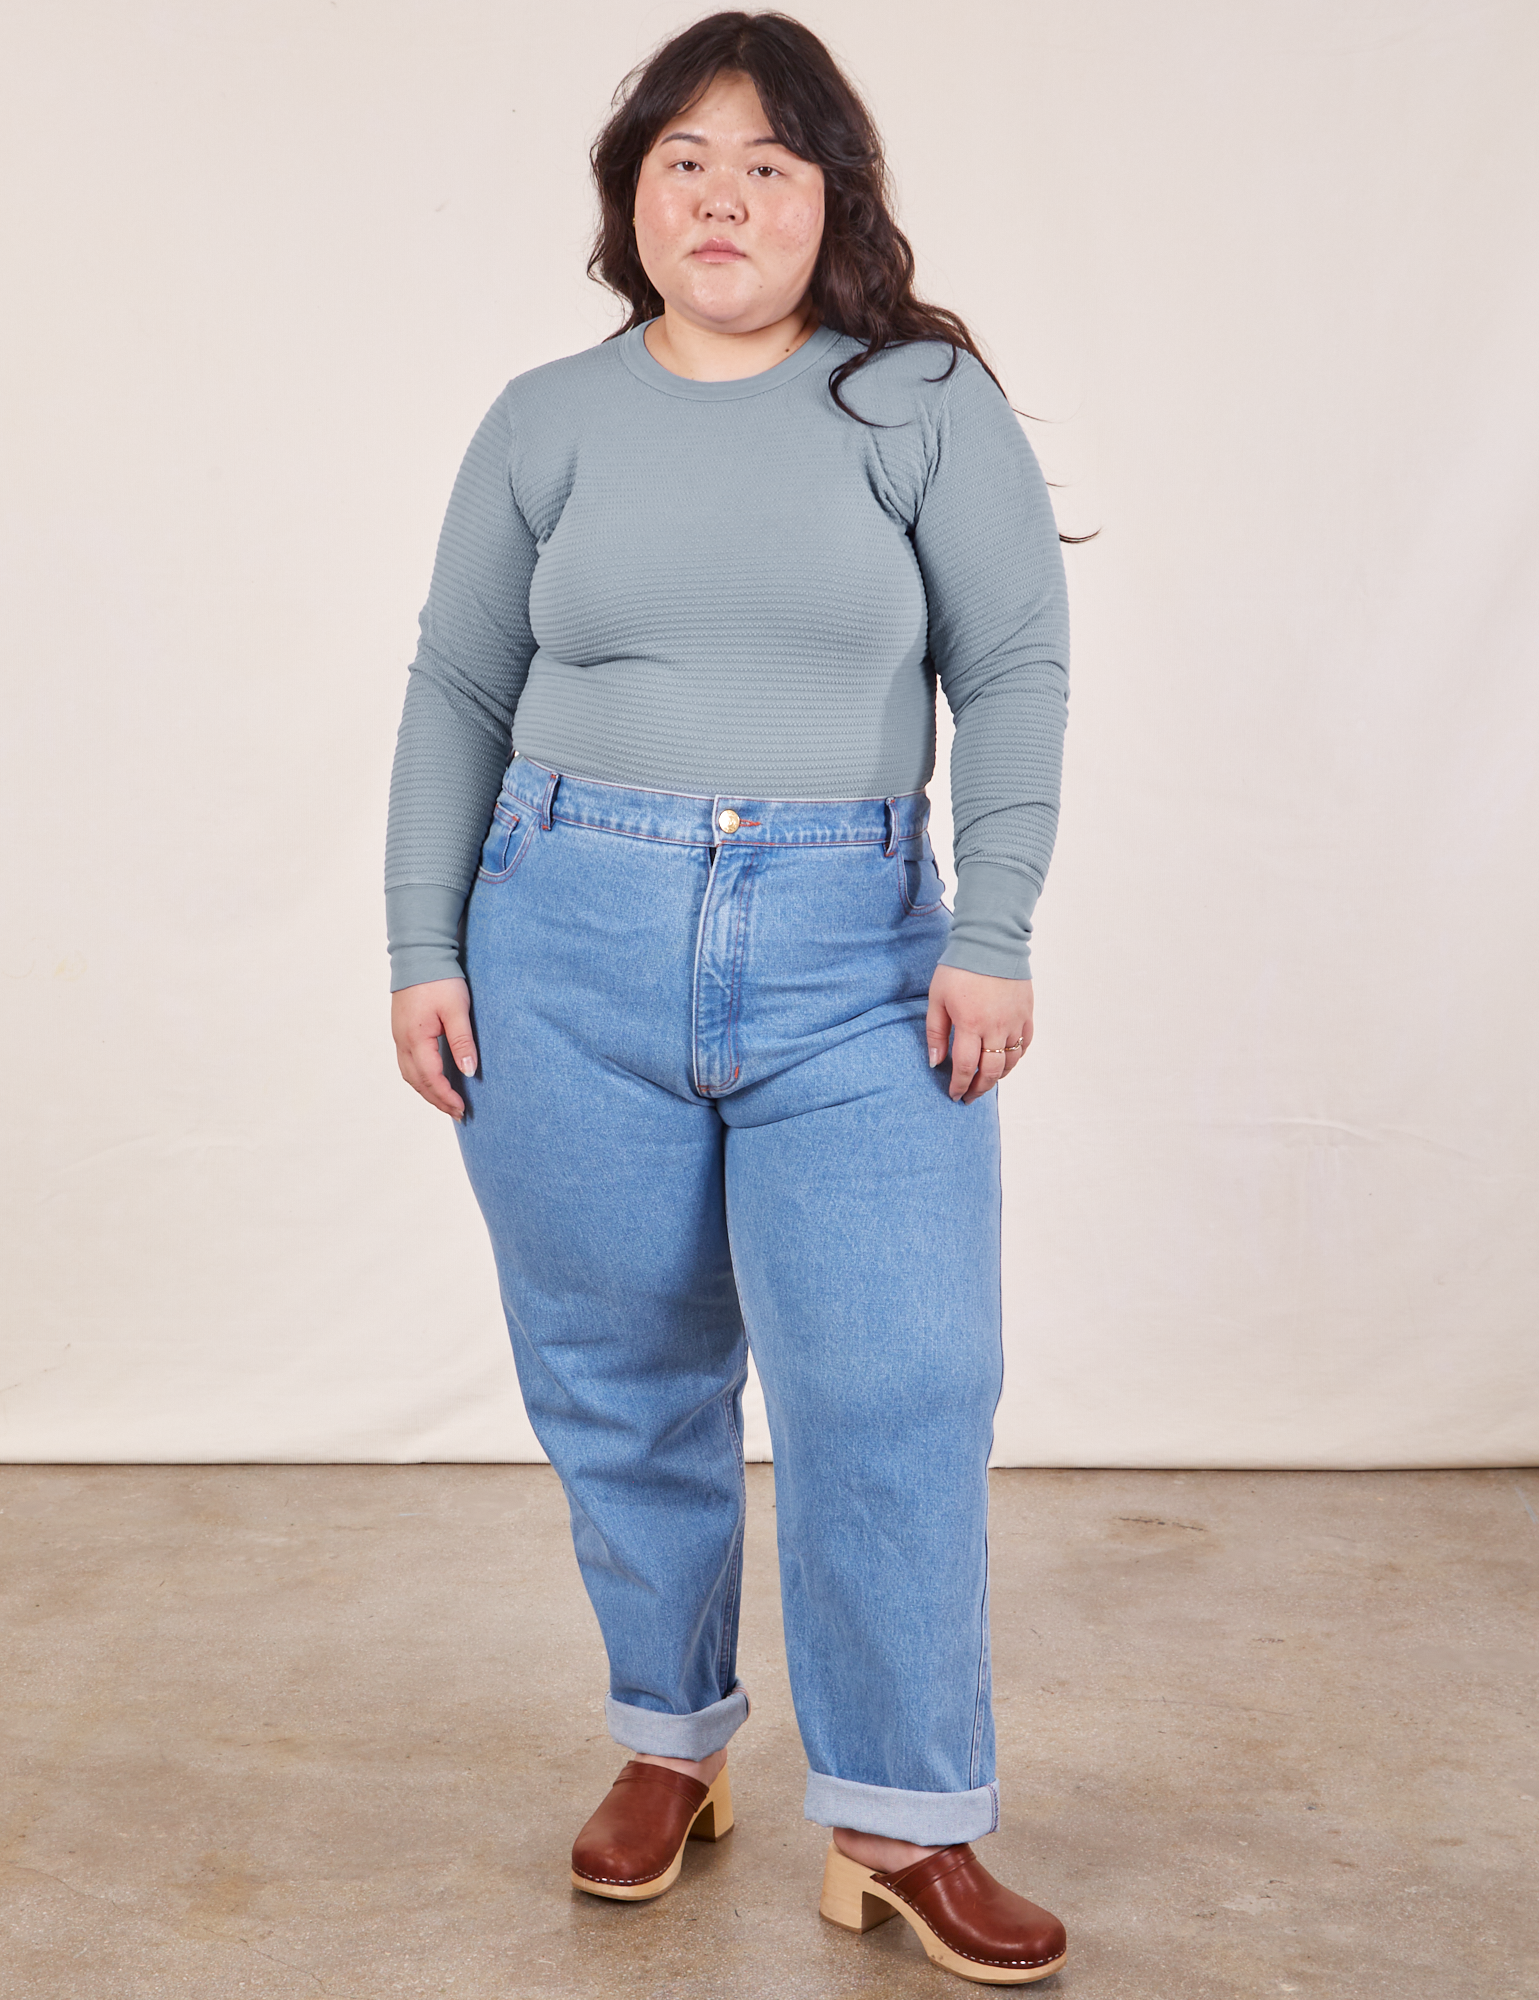 Ashley is wearing Honeycomb Thermal in Periwinkle tucked into light wash Frontier Jeans